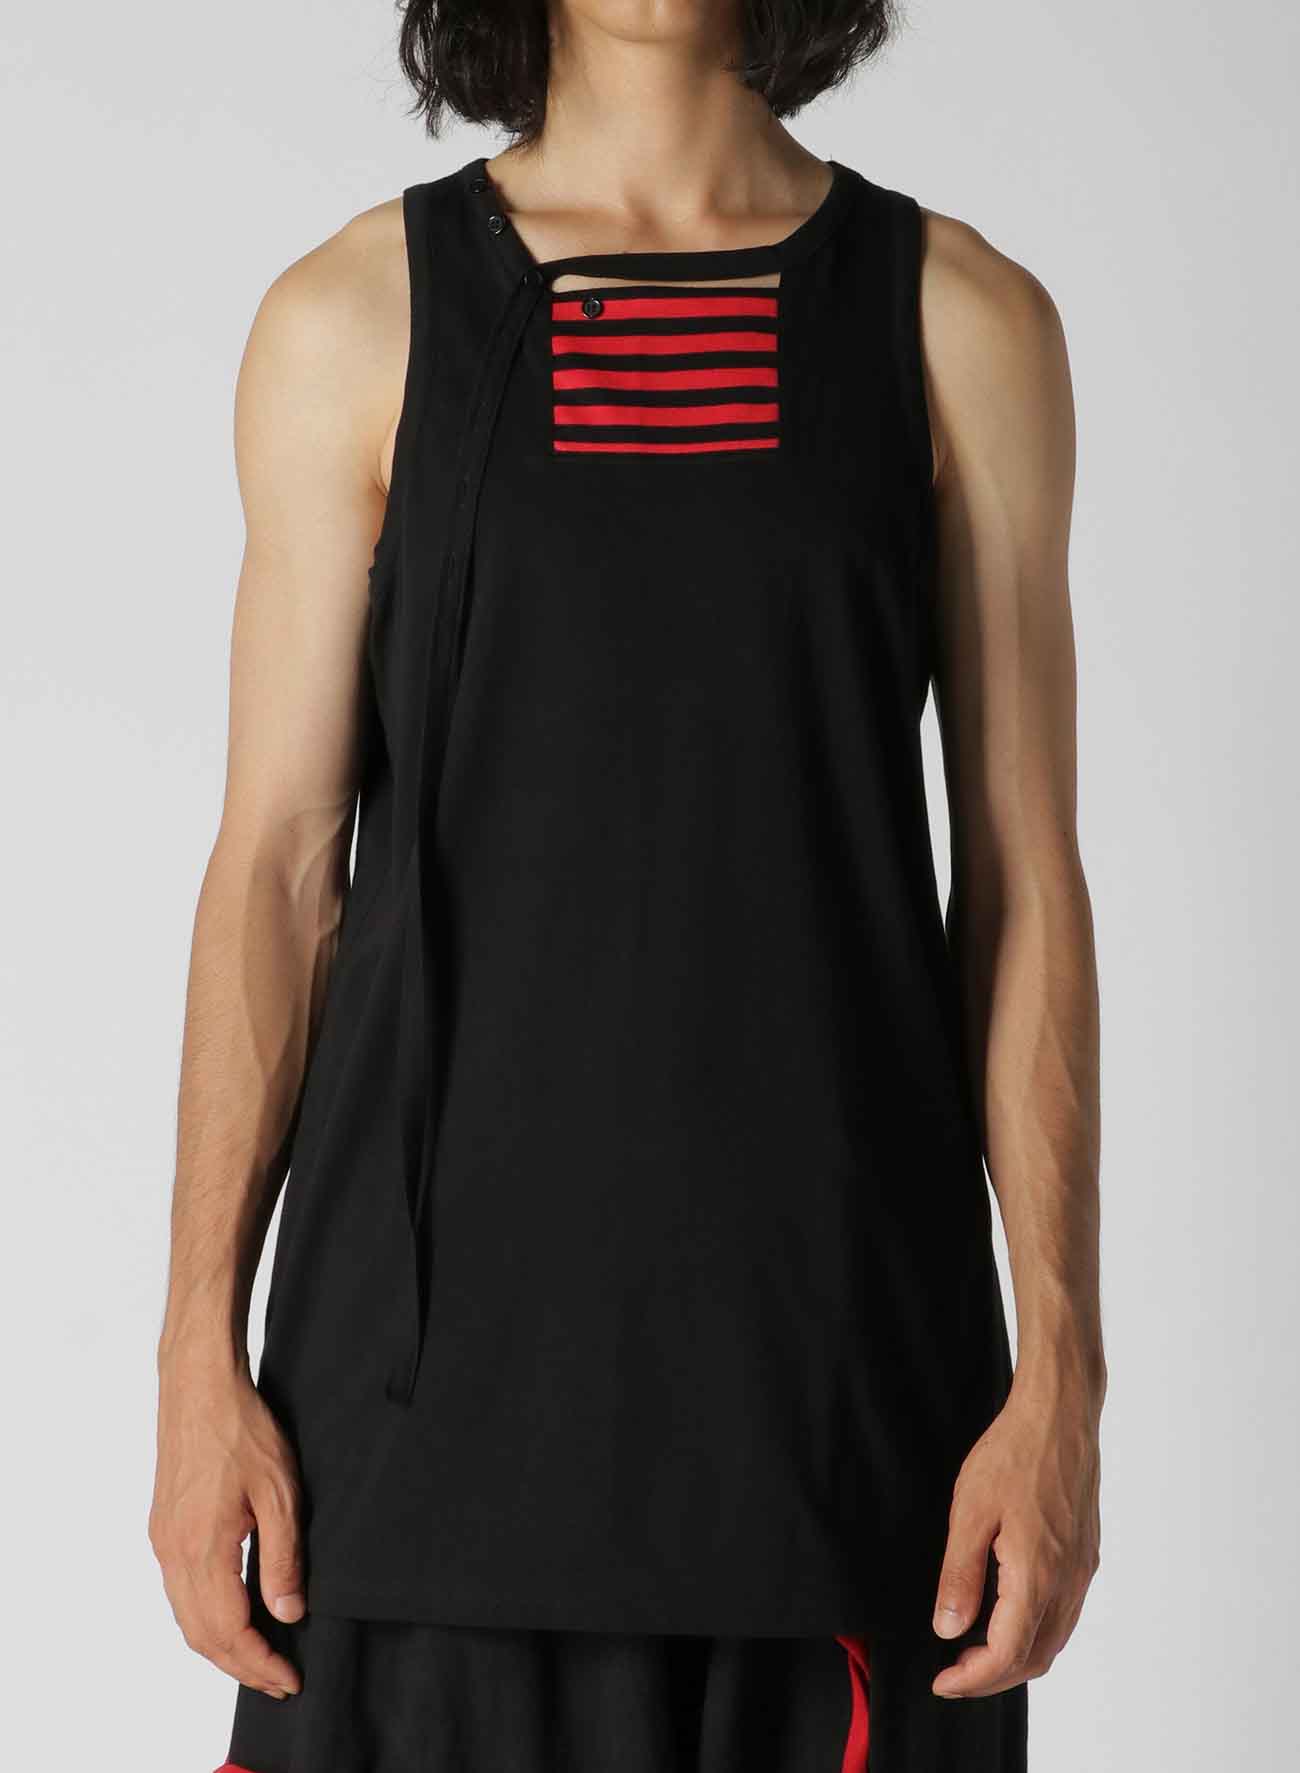 COMBED SINGLE JERSEY BINDER HENRY NECK TANK TOP